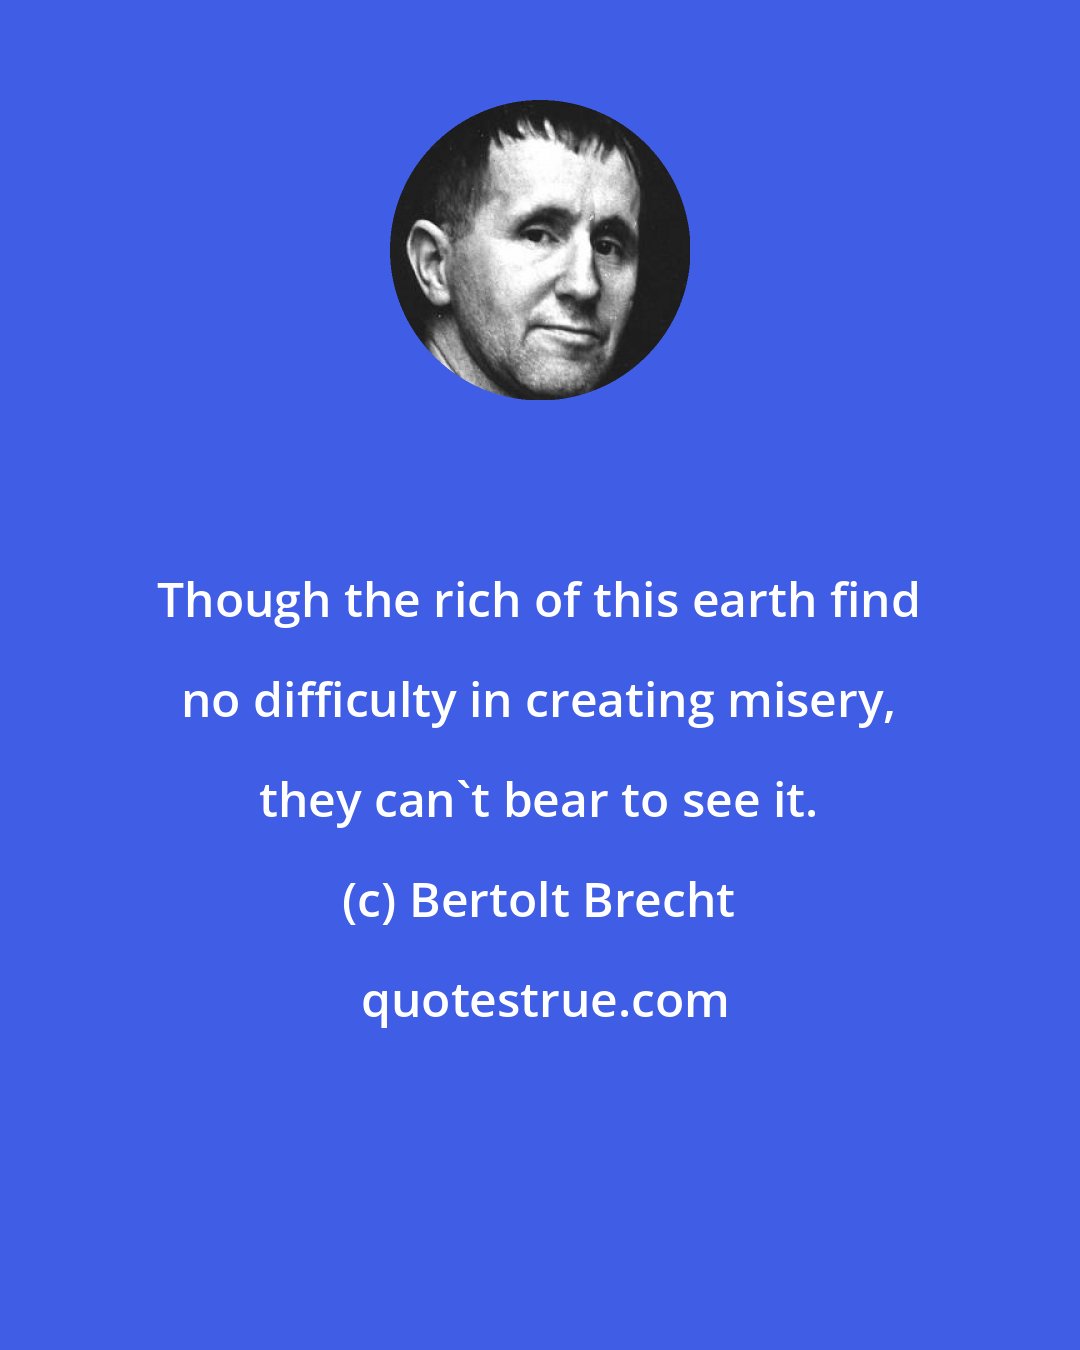 Bertolt Brecht: Though the rich of this earth find no difficulty in creating misery, they can't bear to see it.